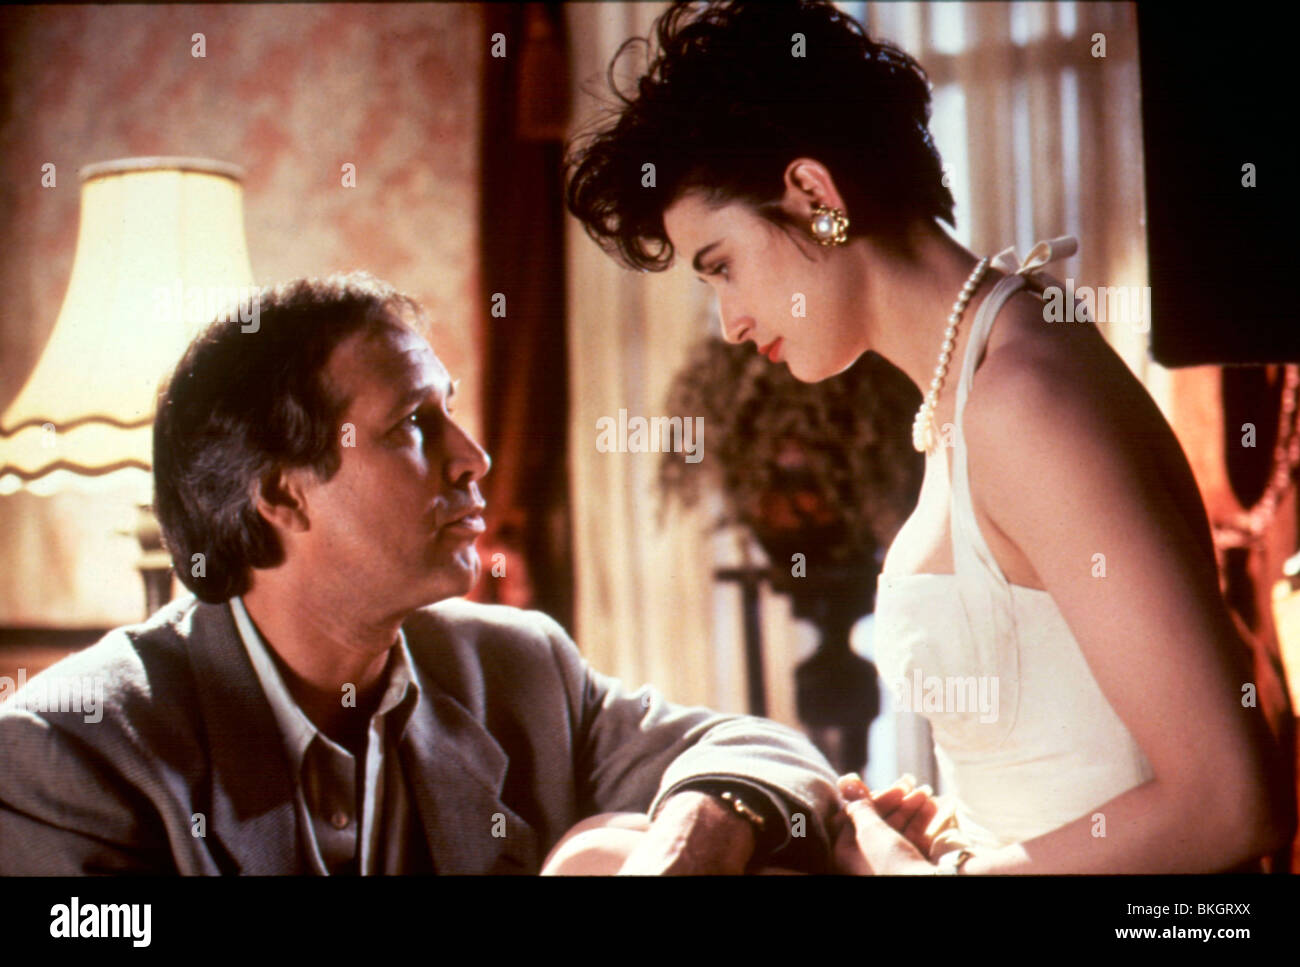 nothing-but-trouble-1991-chevy-chase-demi-moore-nbt-040-BKGRXX.jpg